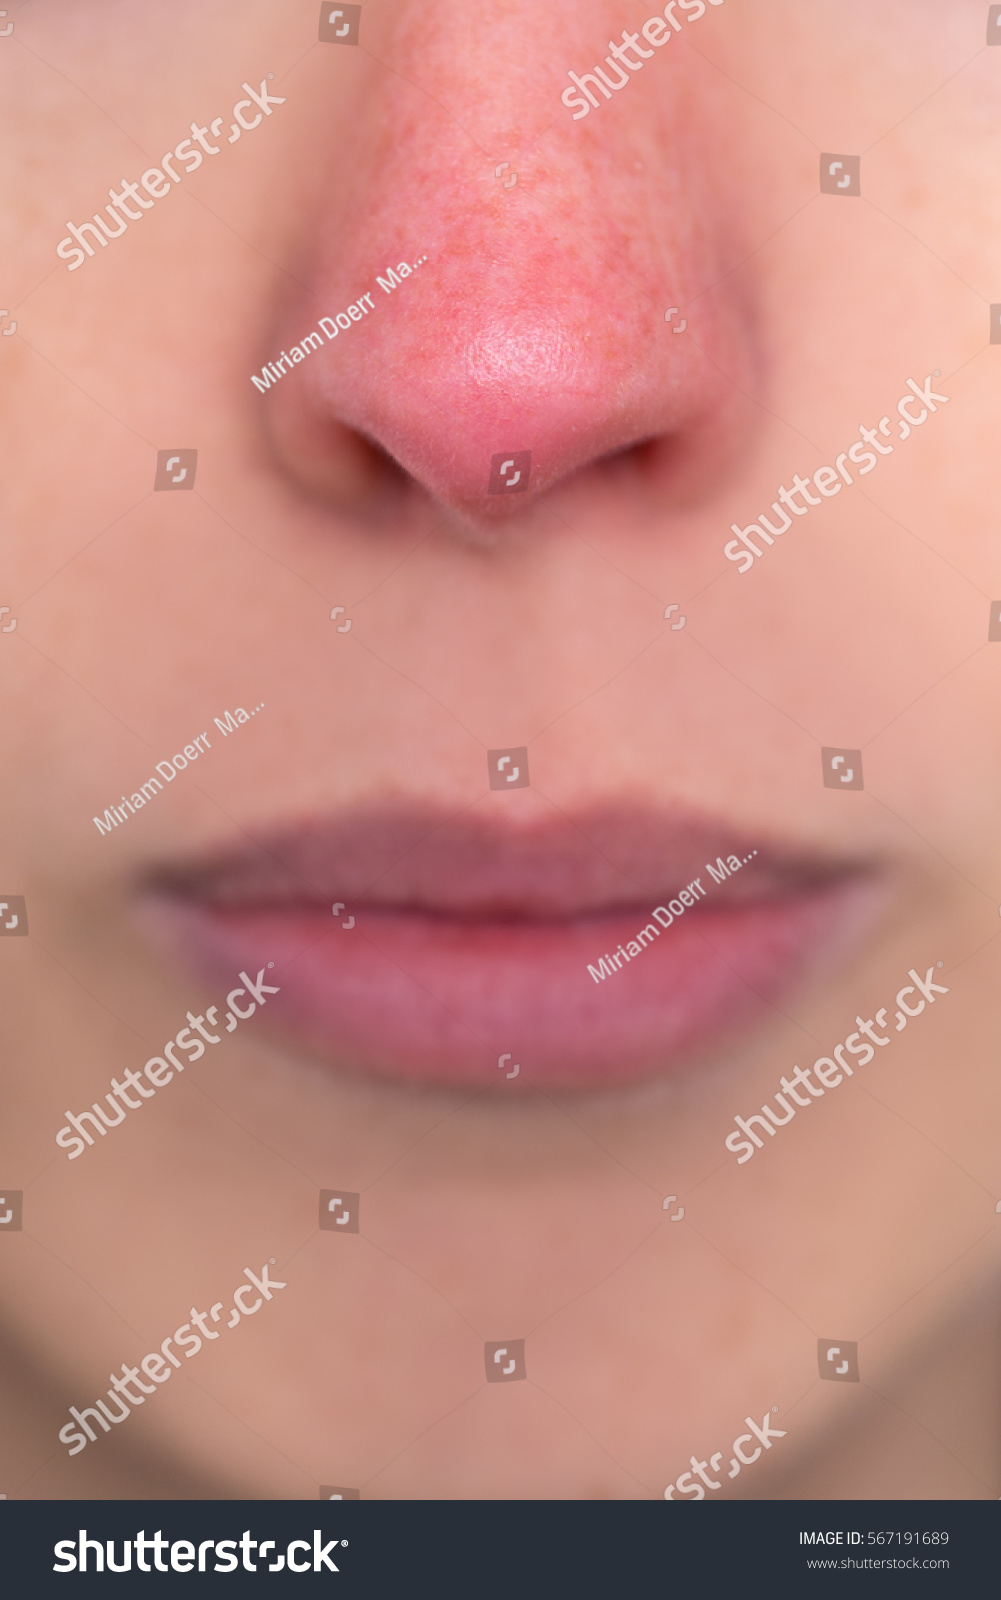 close up, young woman with a red nose, allergy, hypothermia or rosacea #567191689